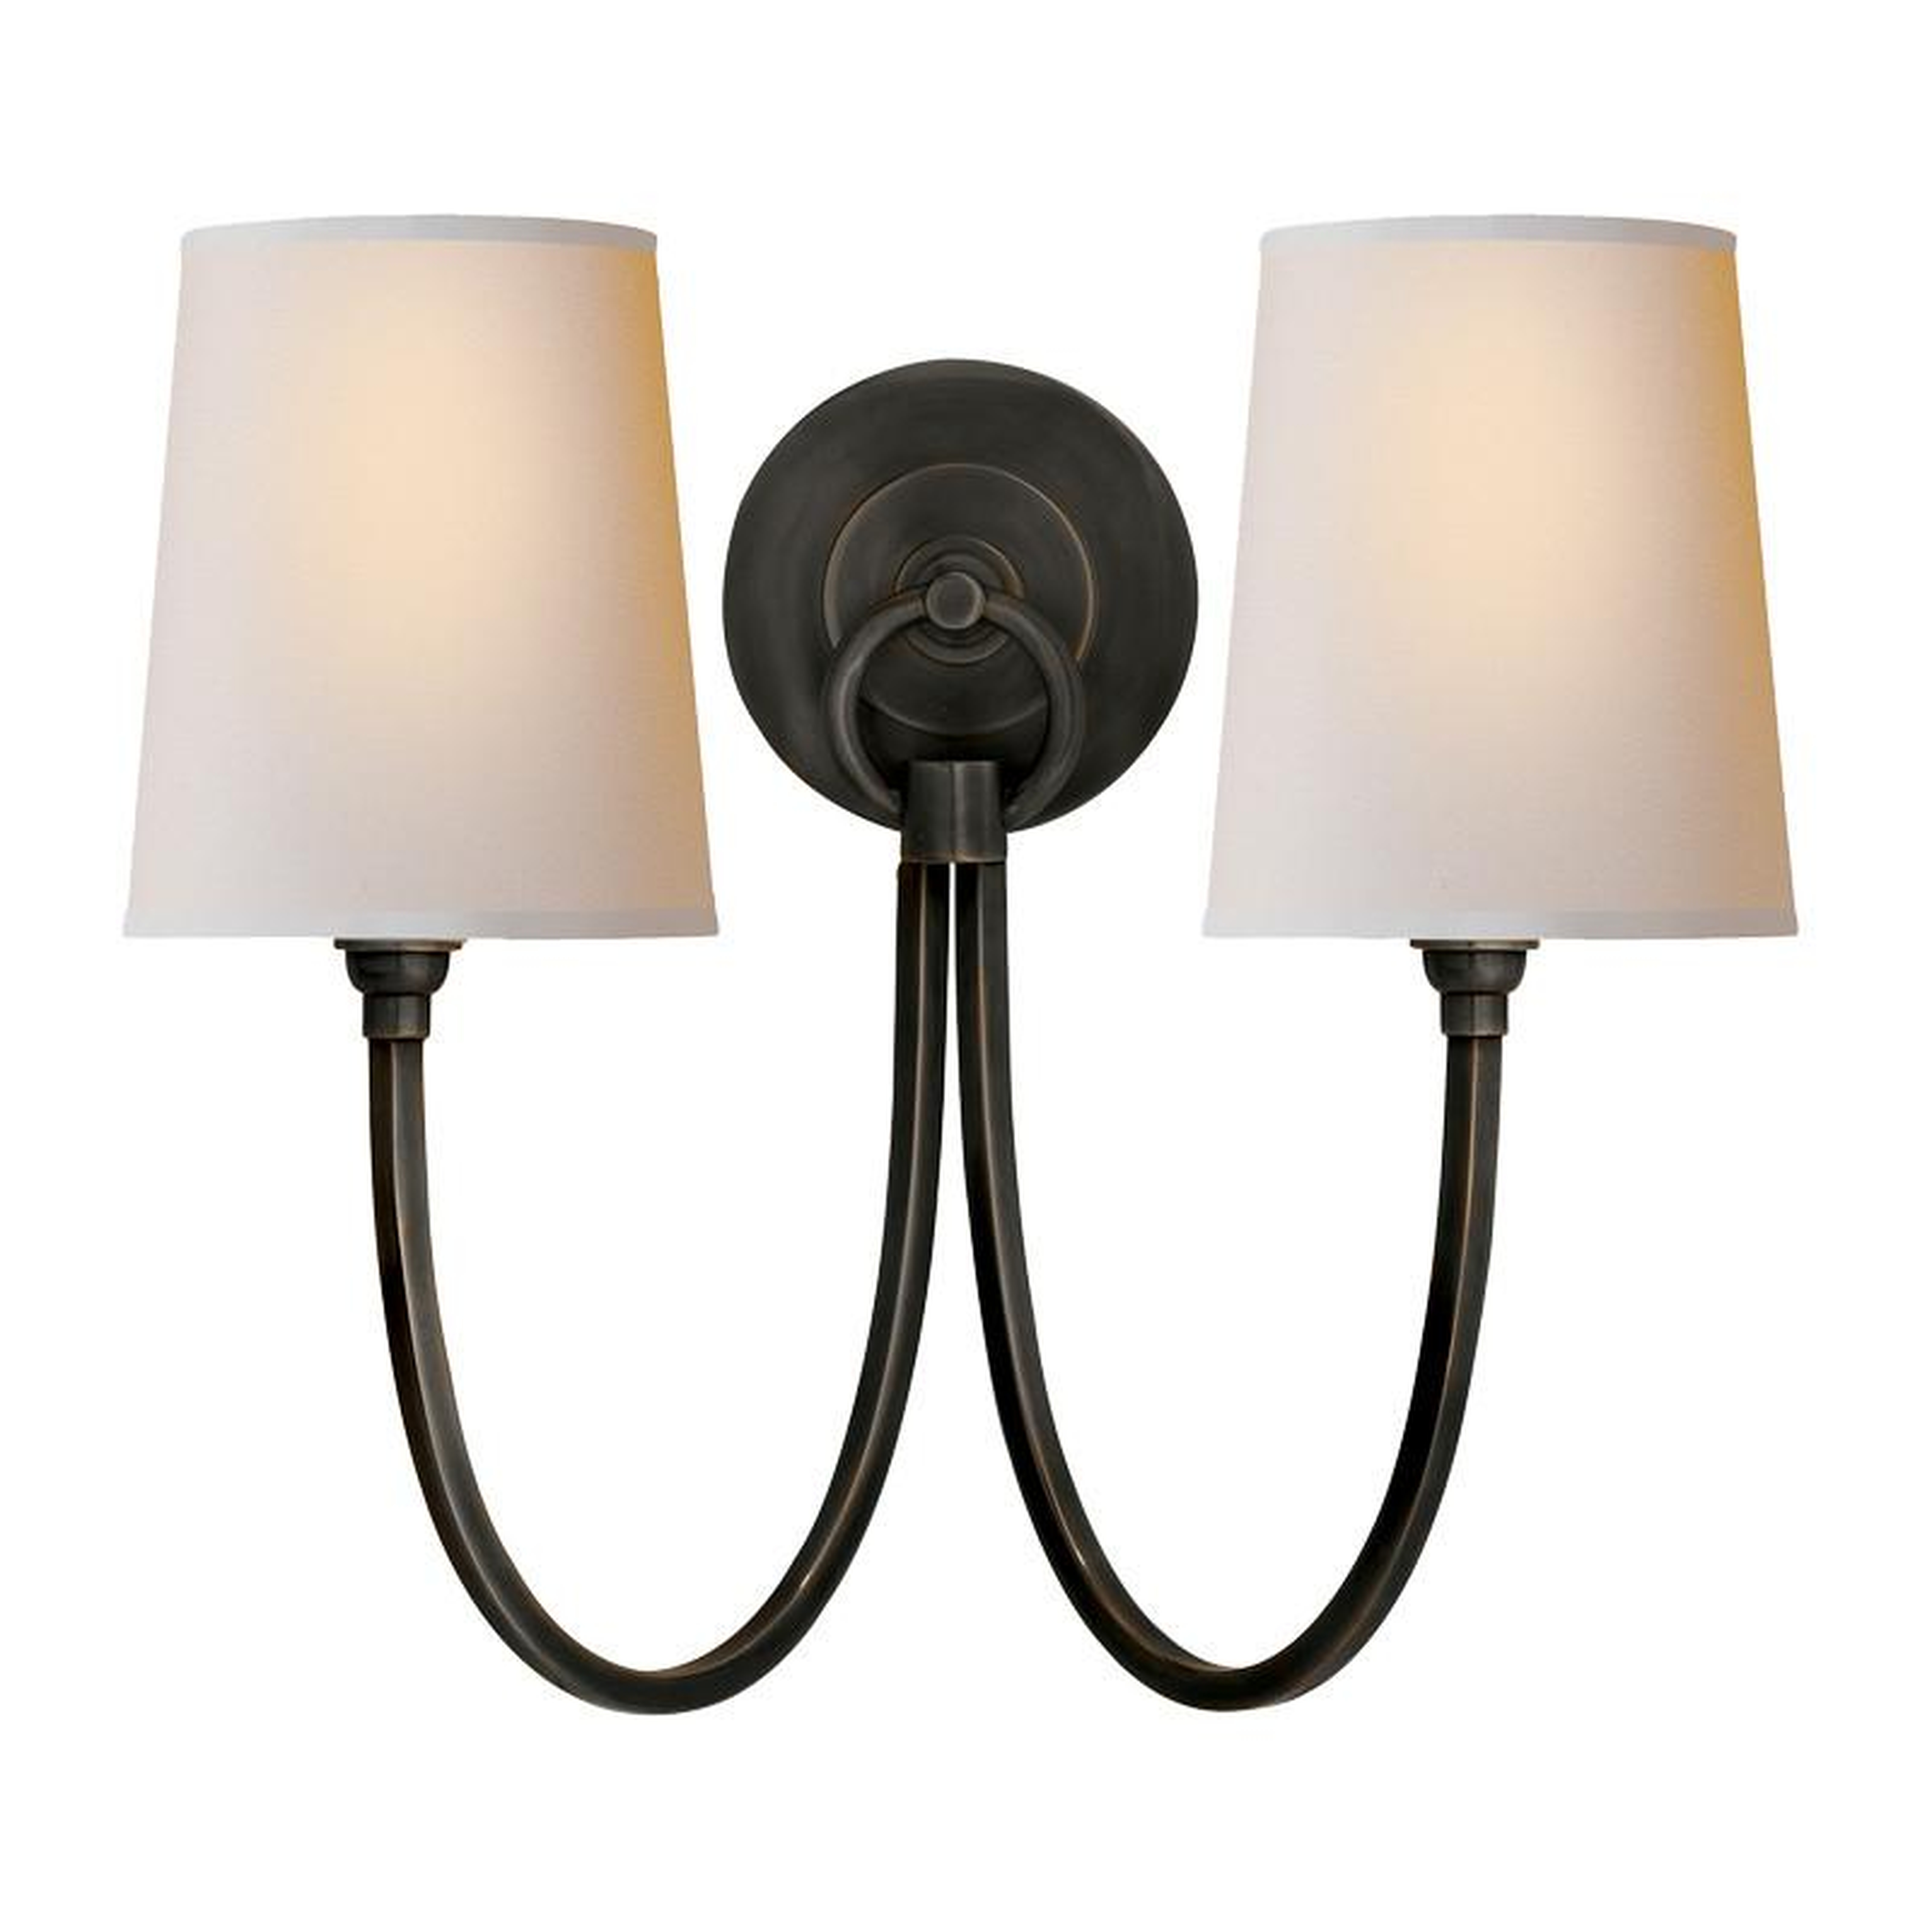 REED DOUBLE SCONCE - BRONZE - McGee & Co.